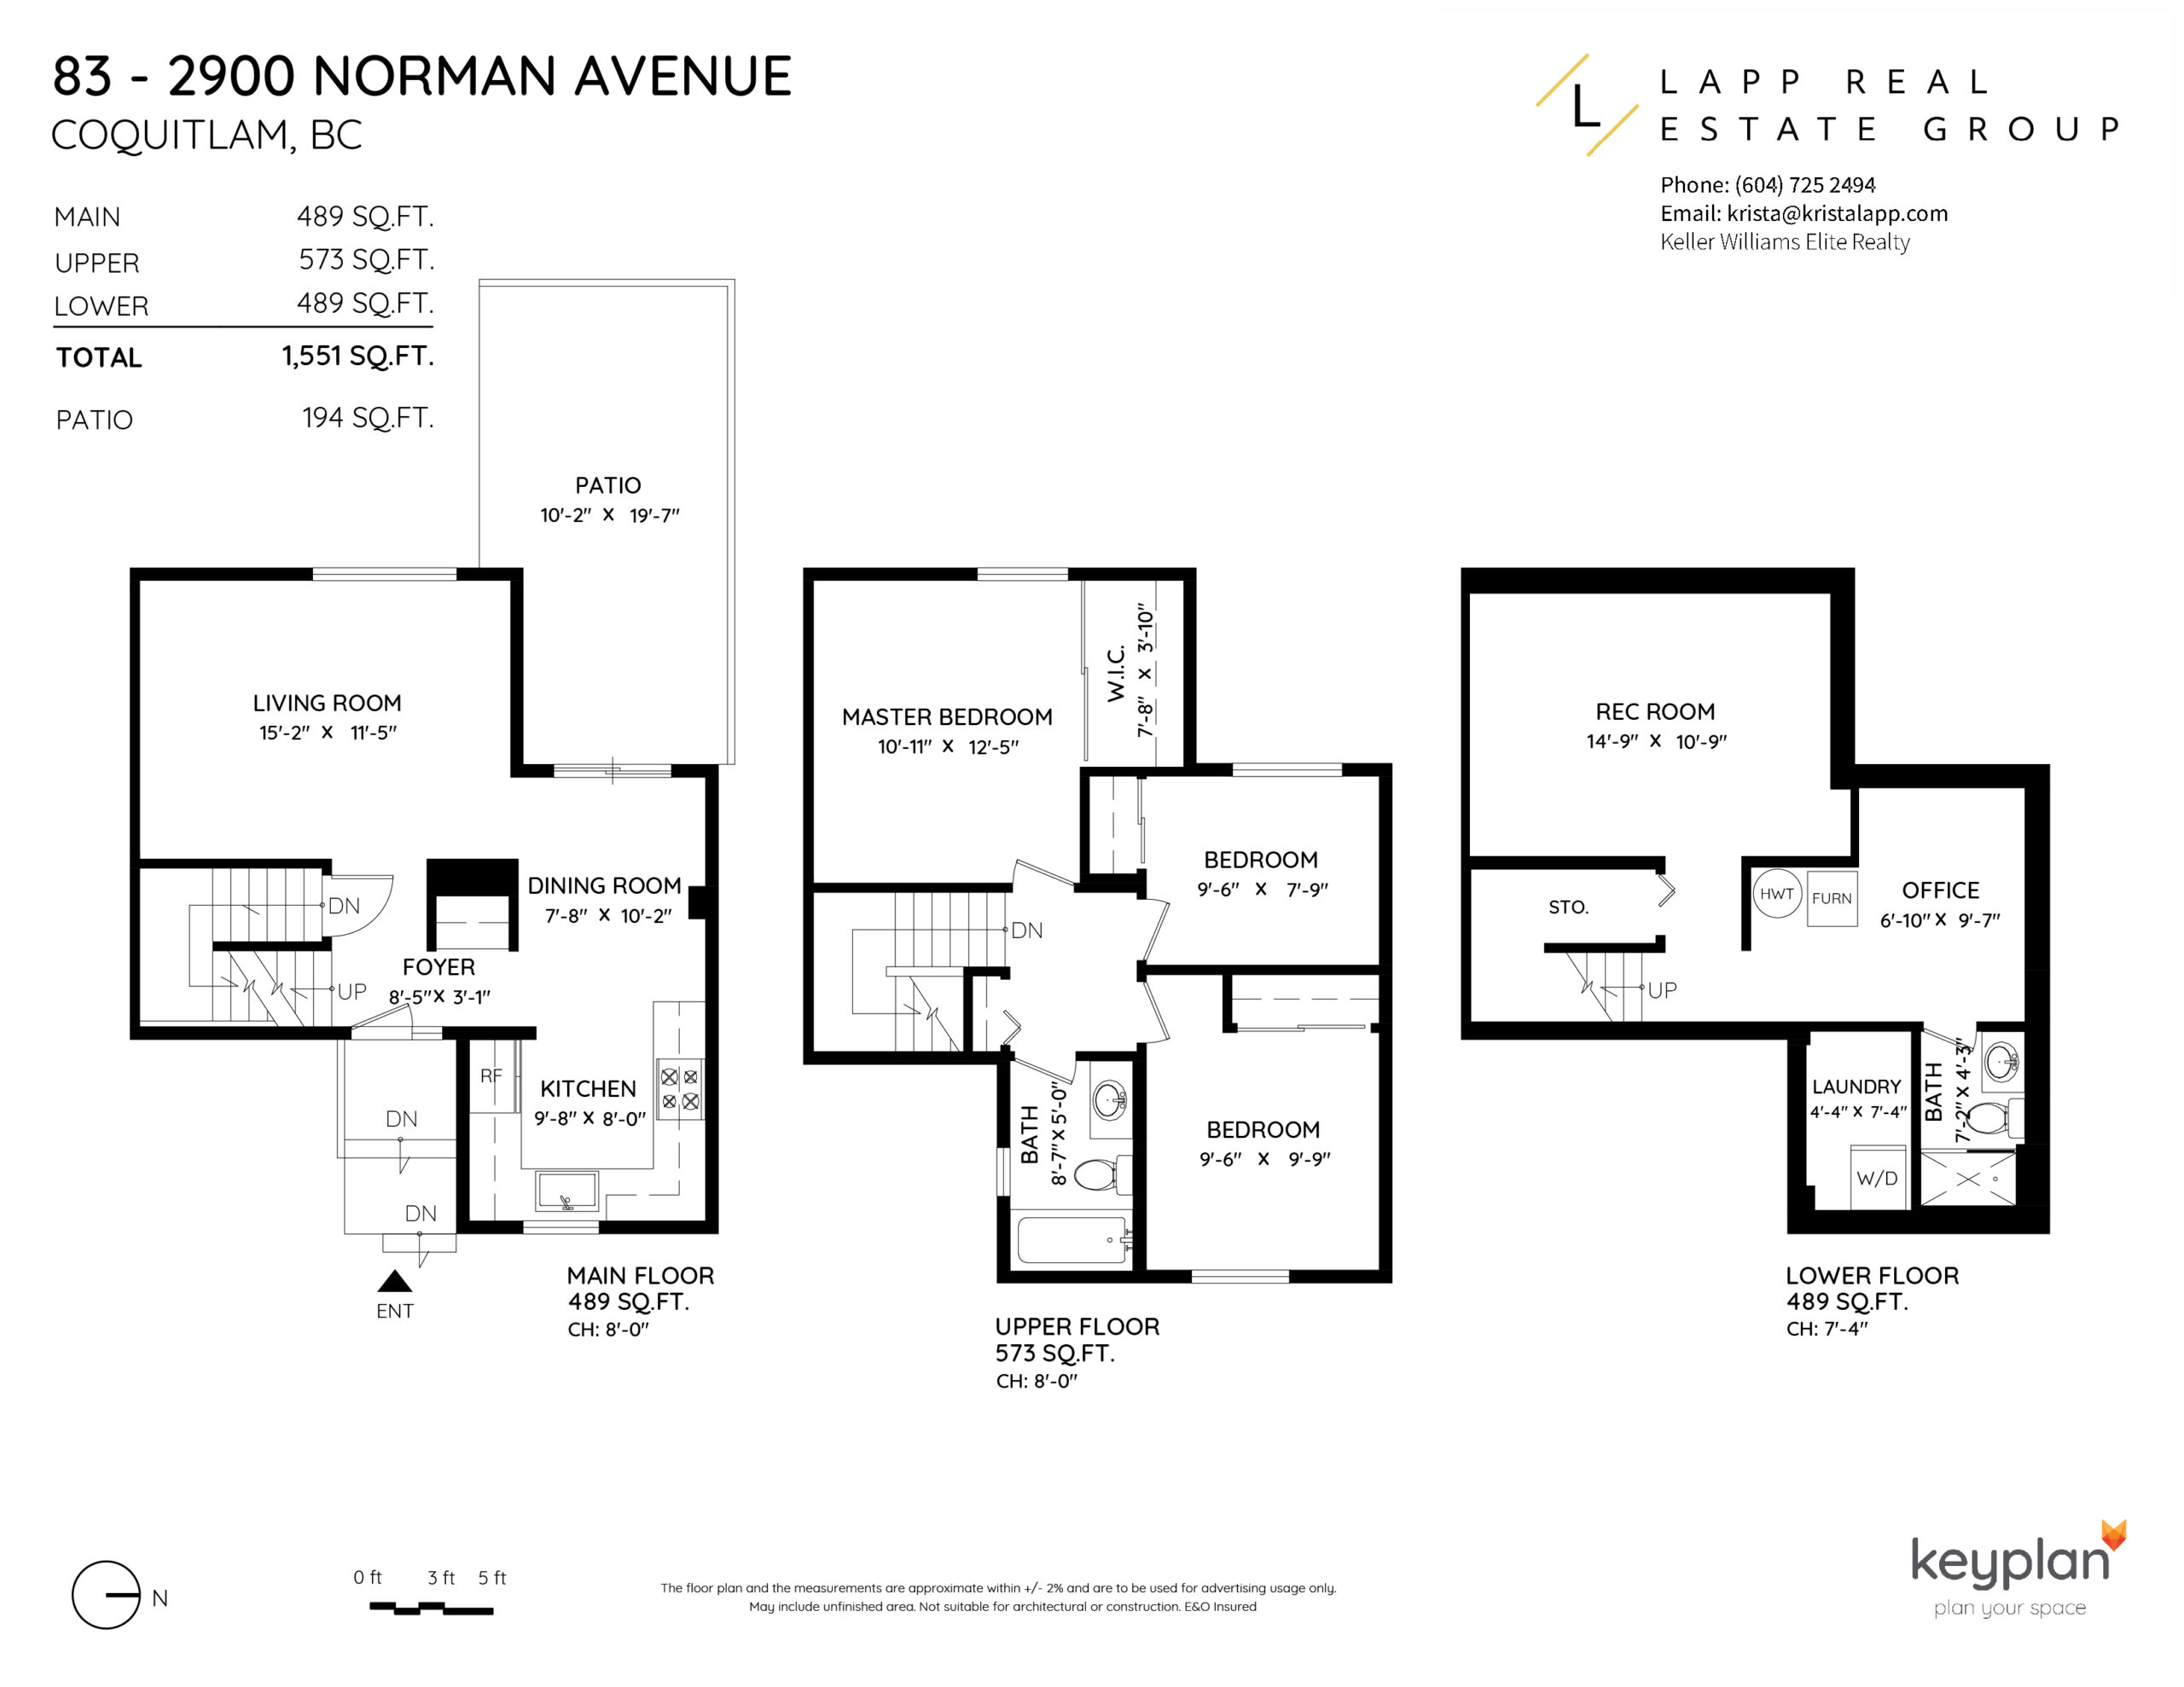 Coquitlam Realtor Krista Lapp 83 2900 Norman Ave Coquitlam Townhome Layout1-01